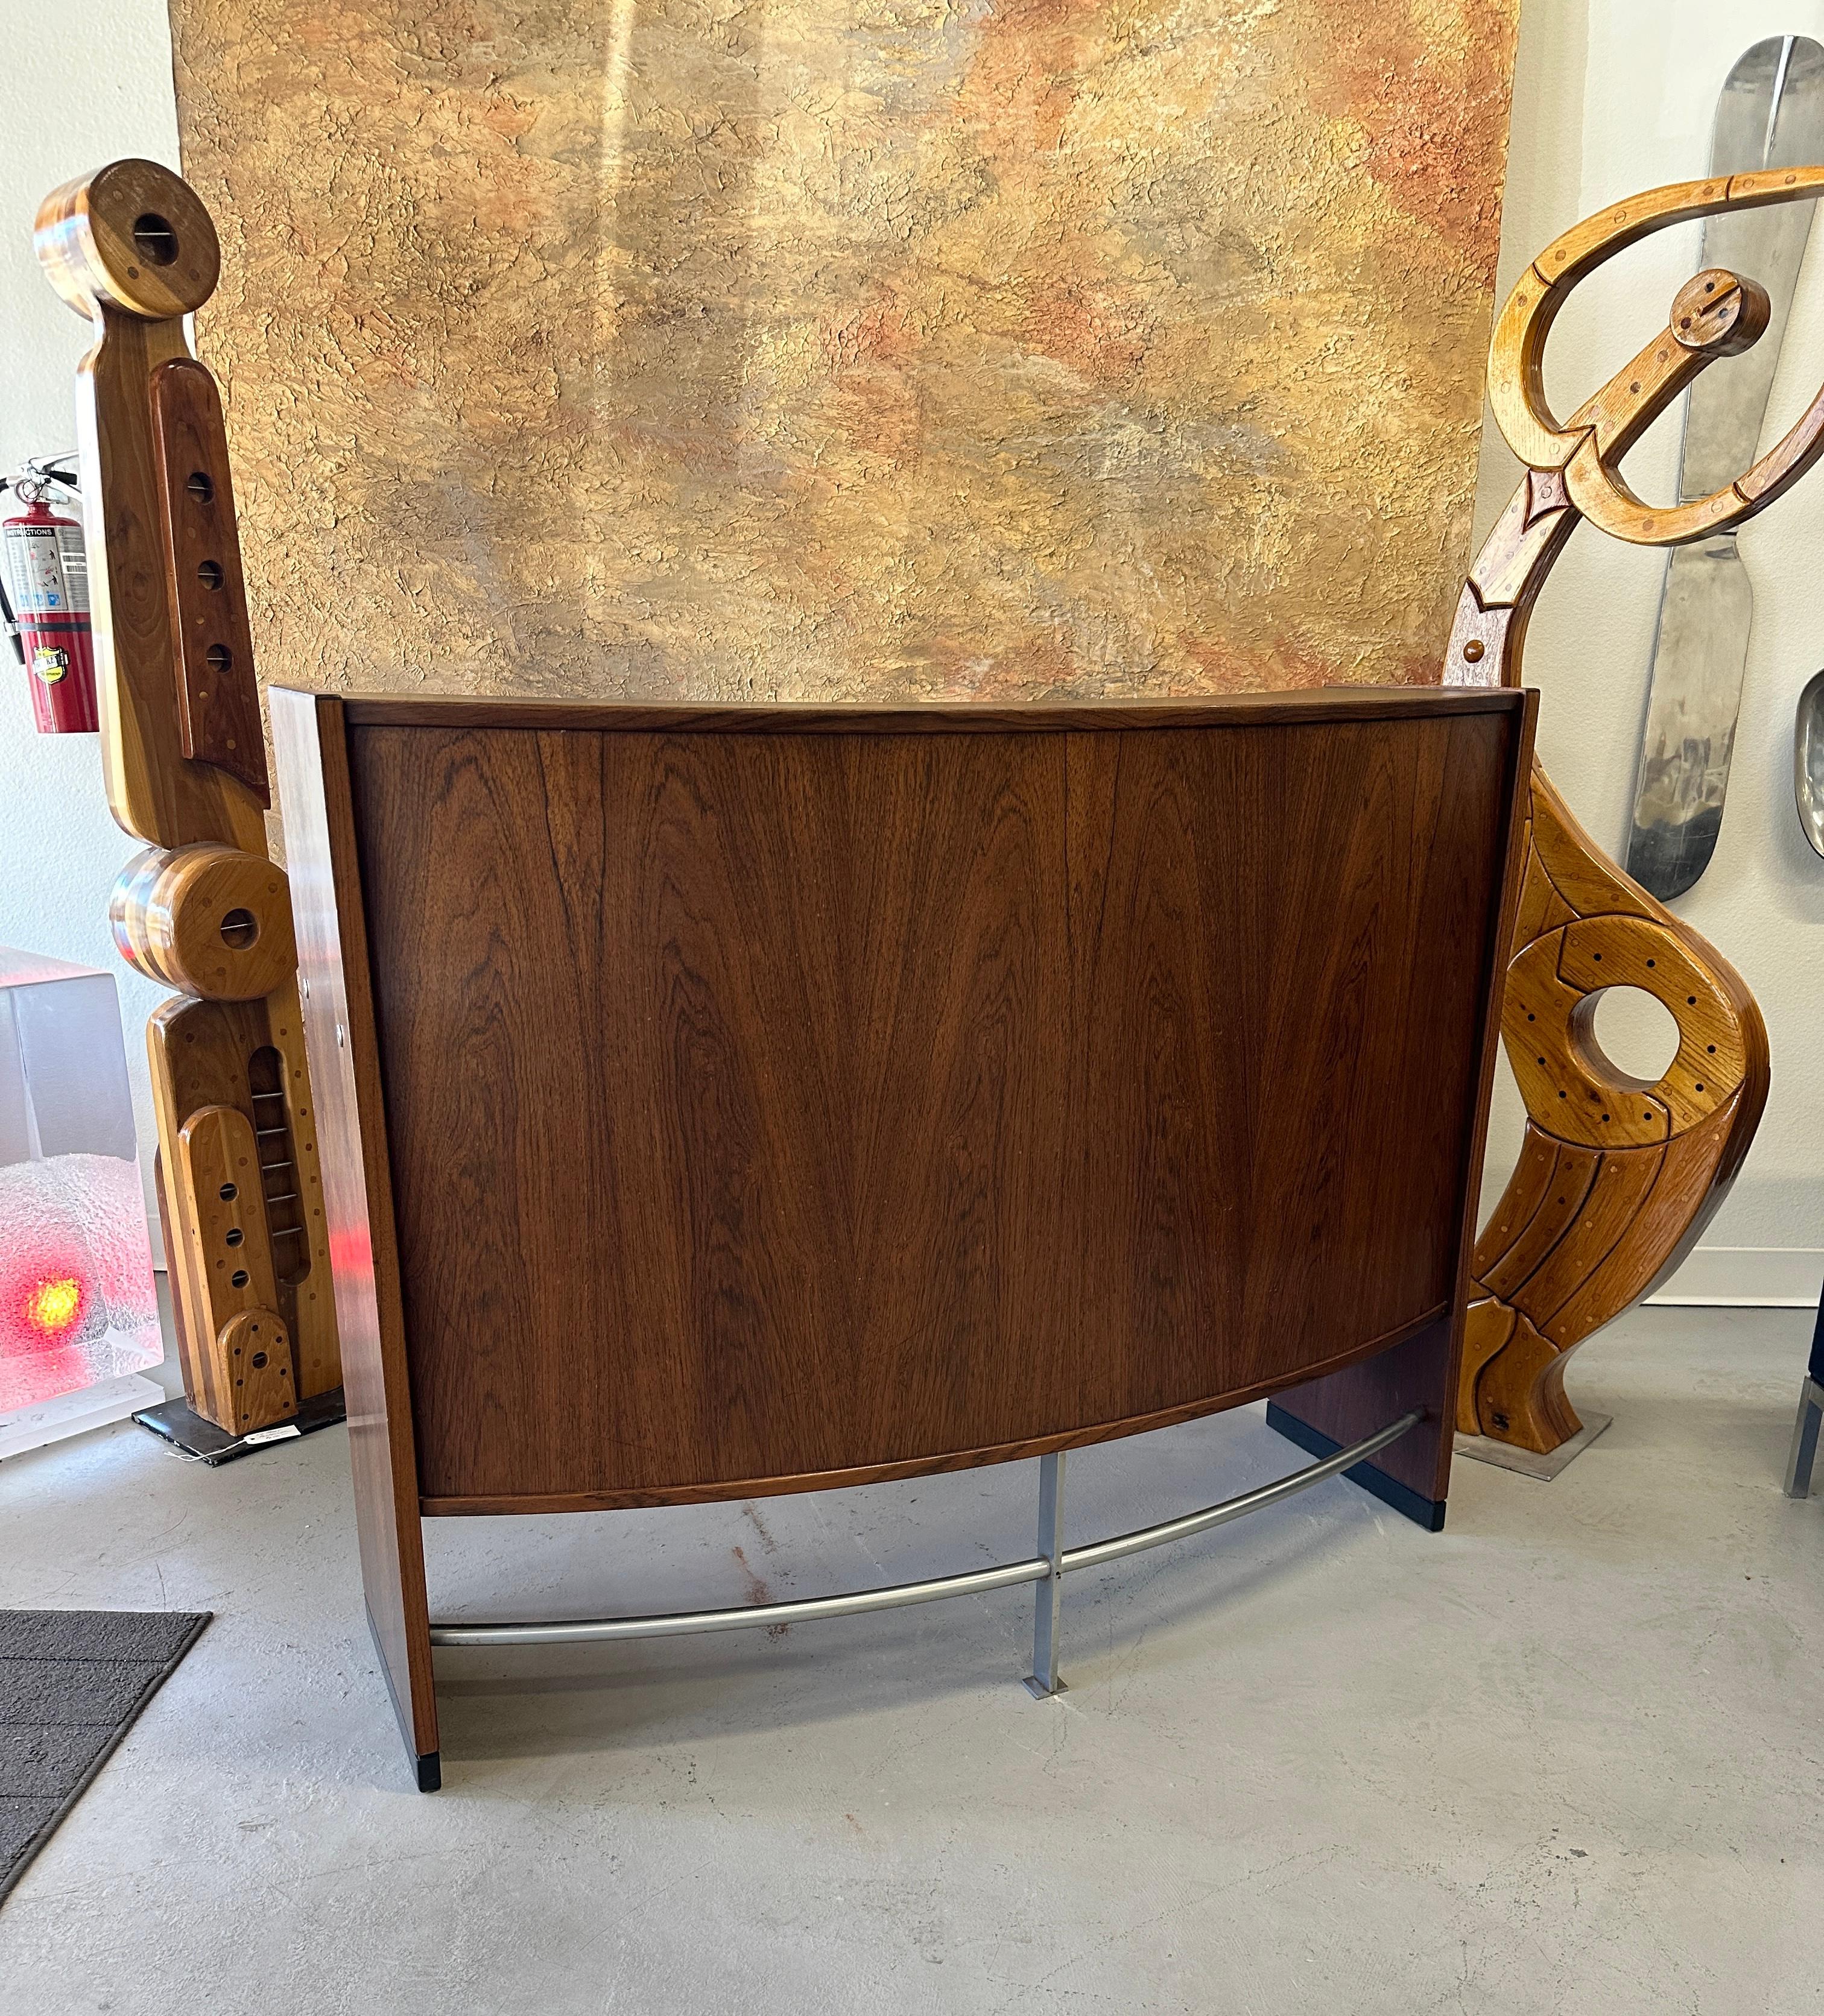 A lovely rosewood bar by designed by Erik Buch for Drylund. Features bottle hole compartments, 2 drawers and sliding doors. Curved front with a metal rail or footrest on the bottom. In good age appropriate condition with some minor marks to the